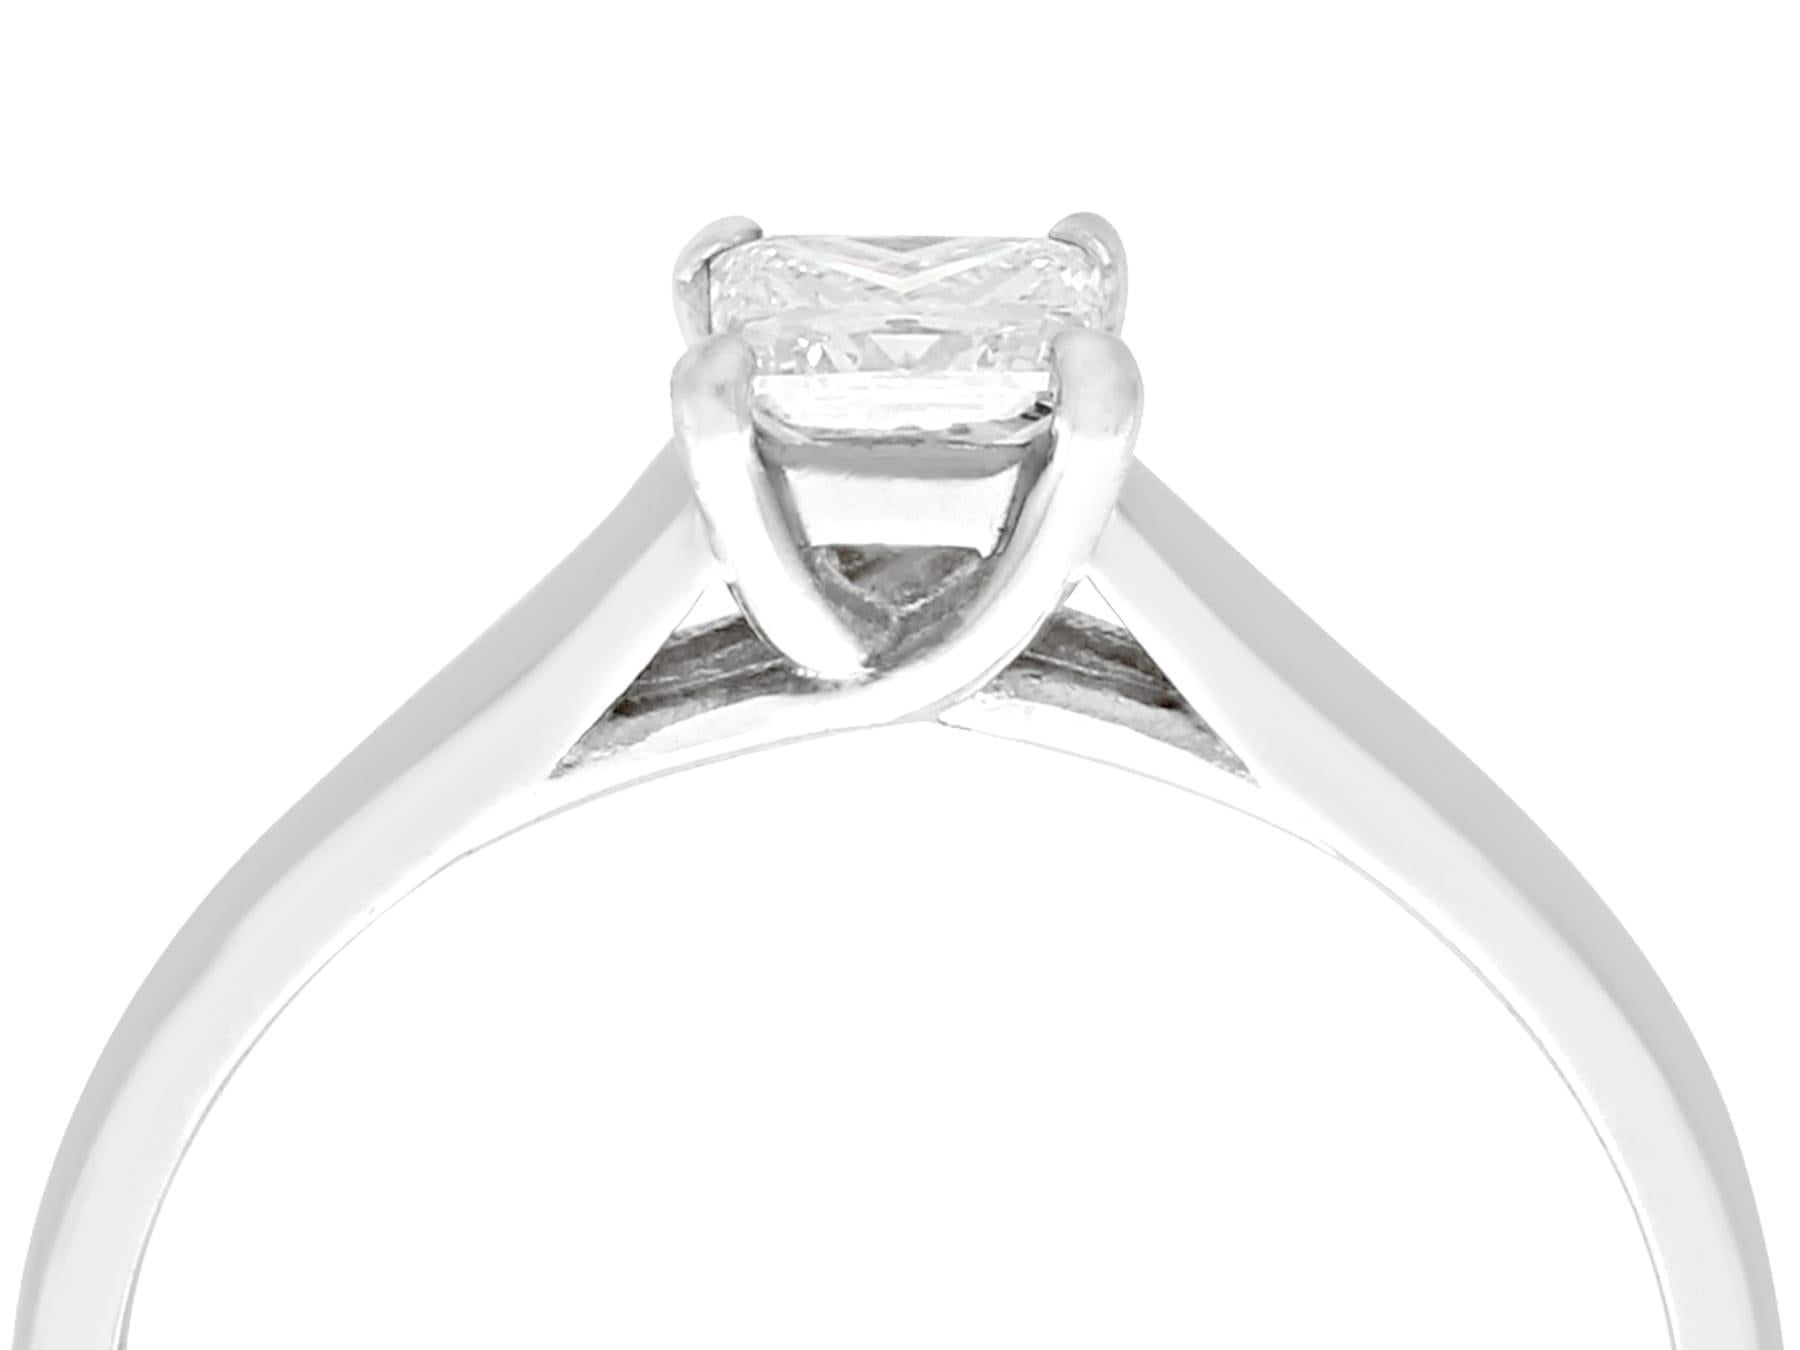 A fine and impressive vintage 0.48 carat diamond and 18 karat white gold solitaire style engagement ring; part of our diverse vintage diamond jewelry collections.

This fine and impressive princess cut solitaire ring has been crafted in 18k white